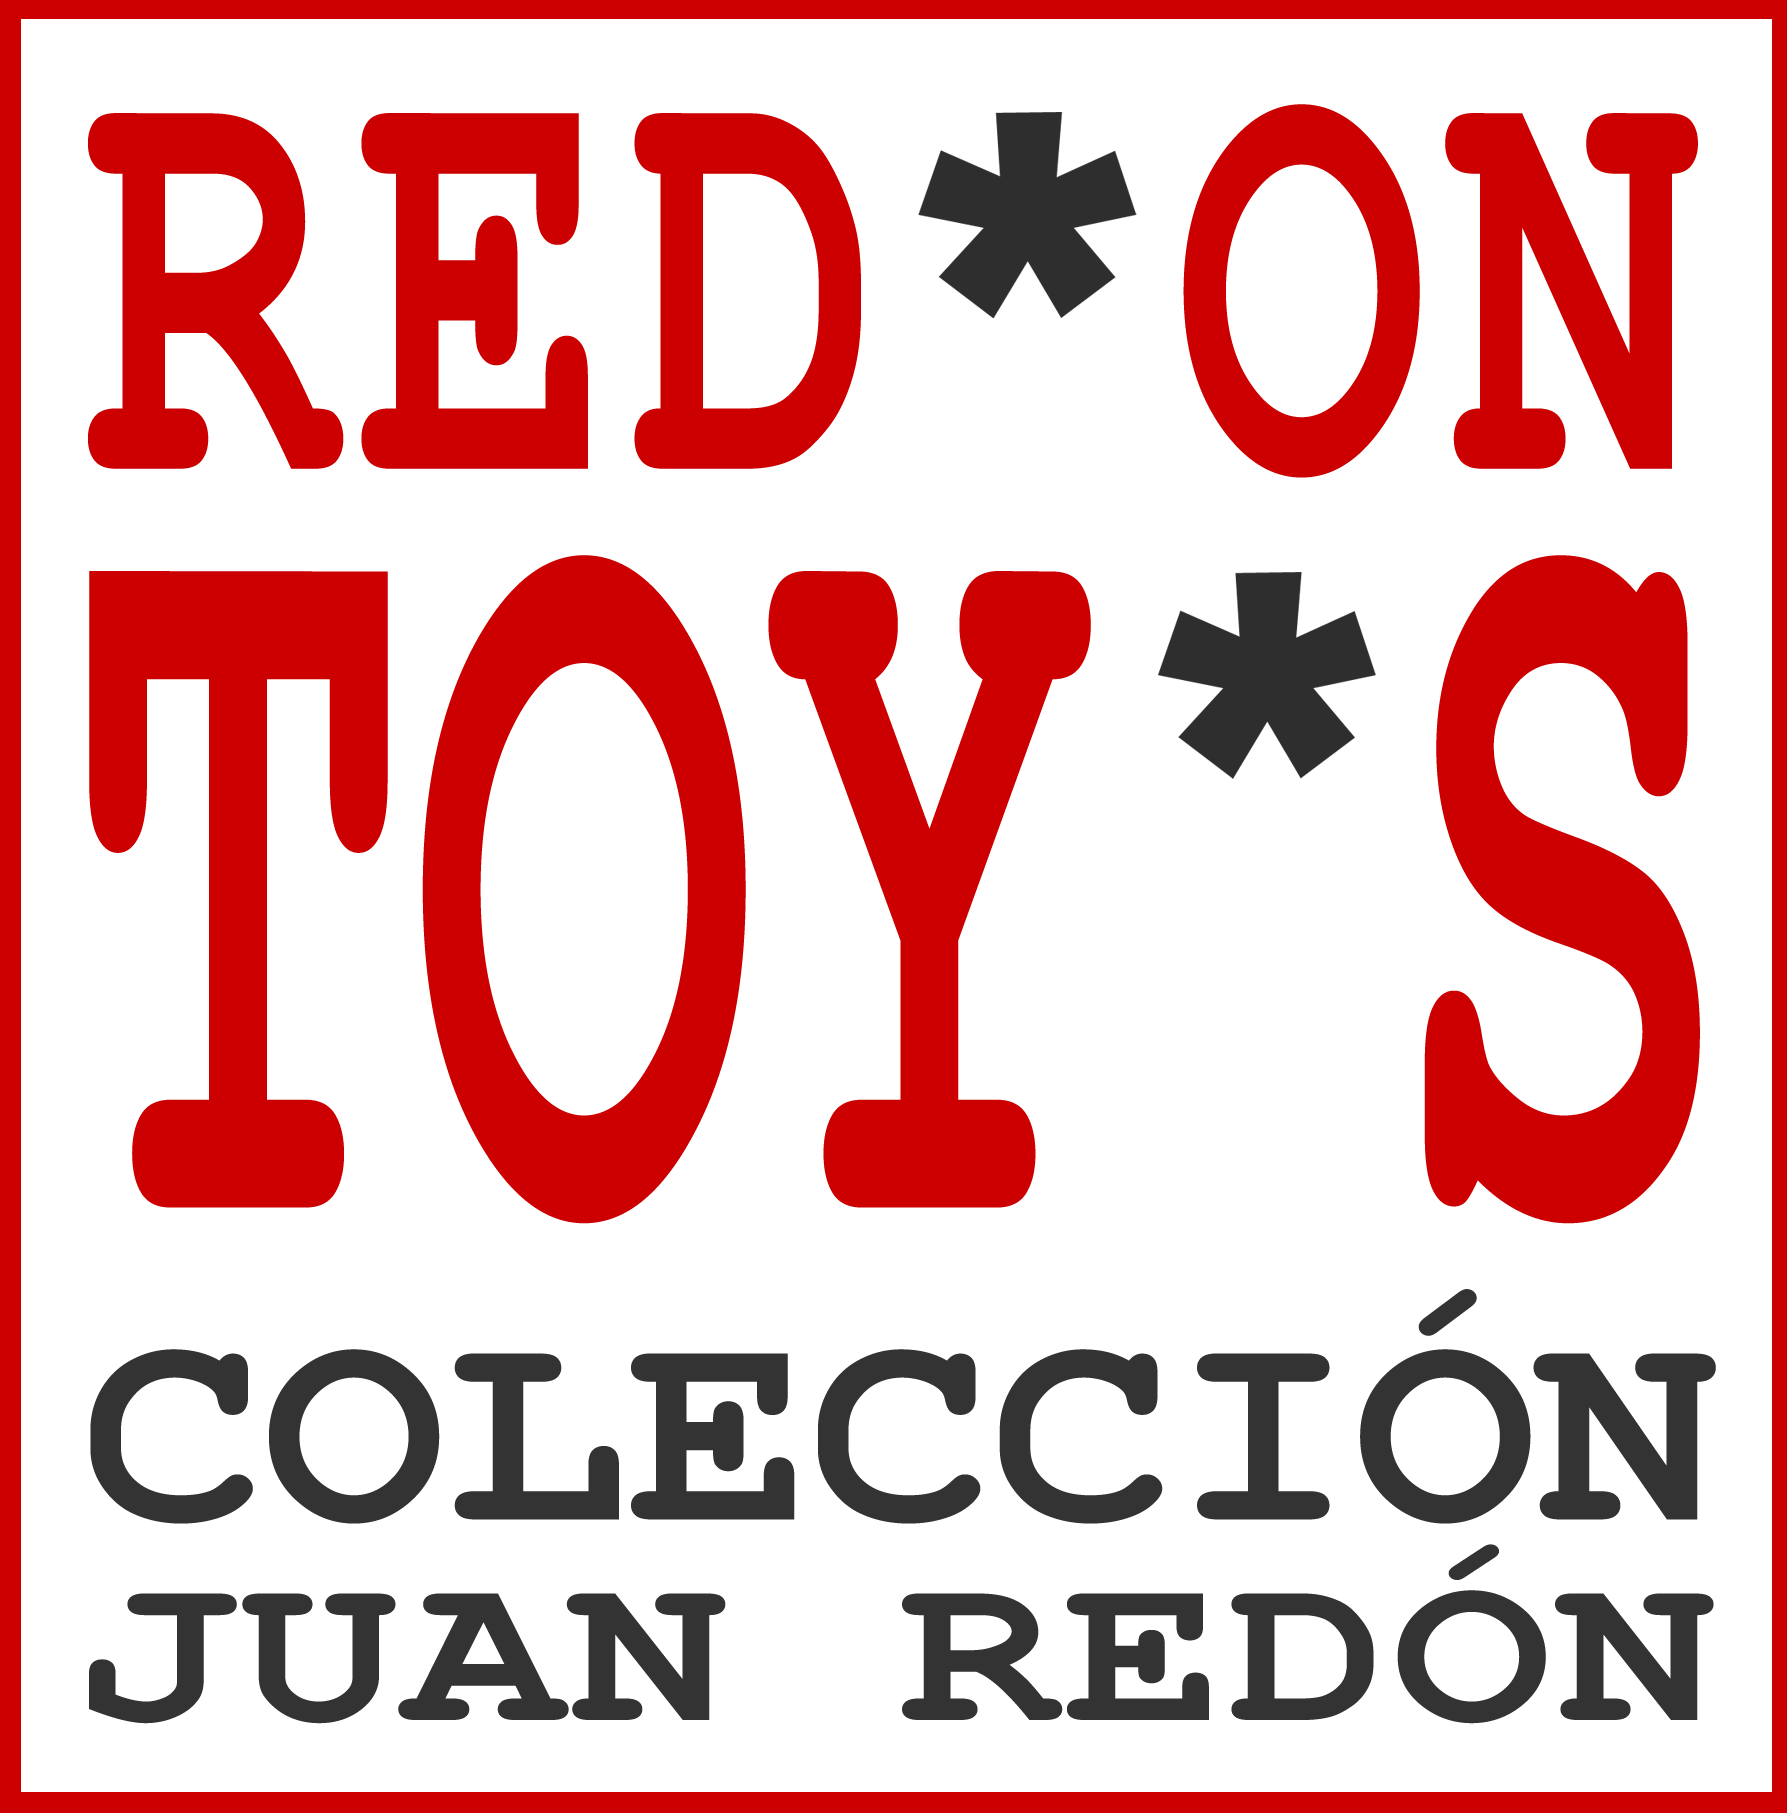 RED*ON TOY*S